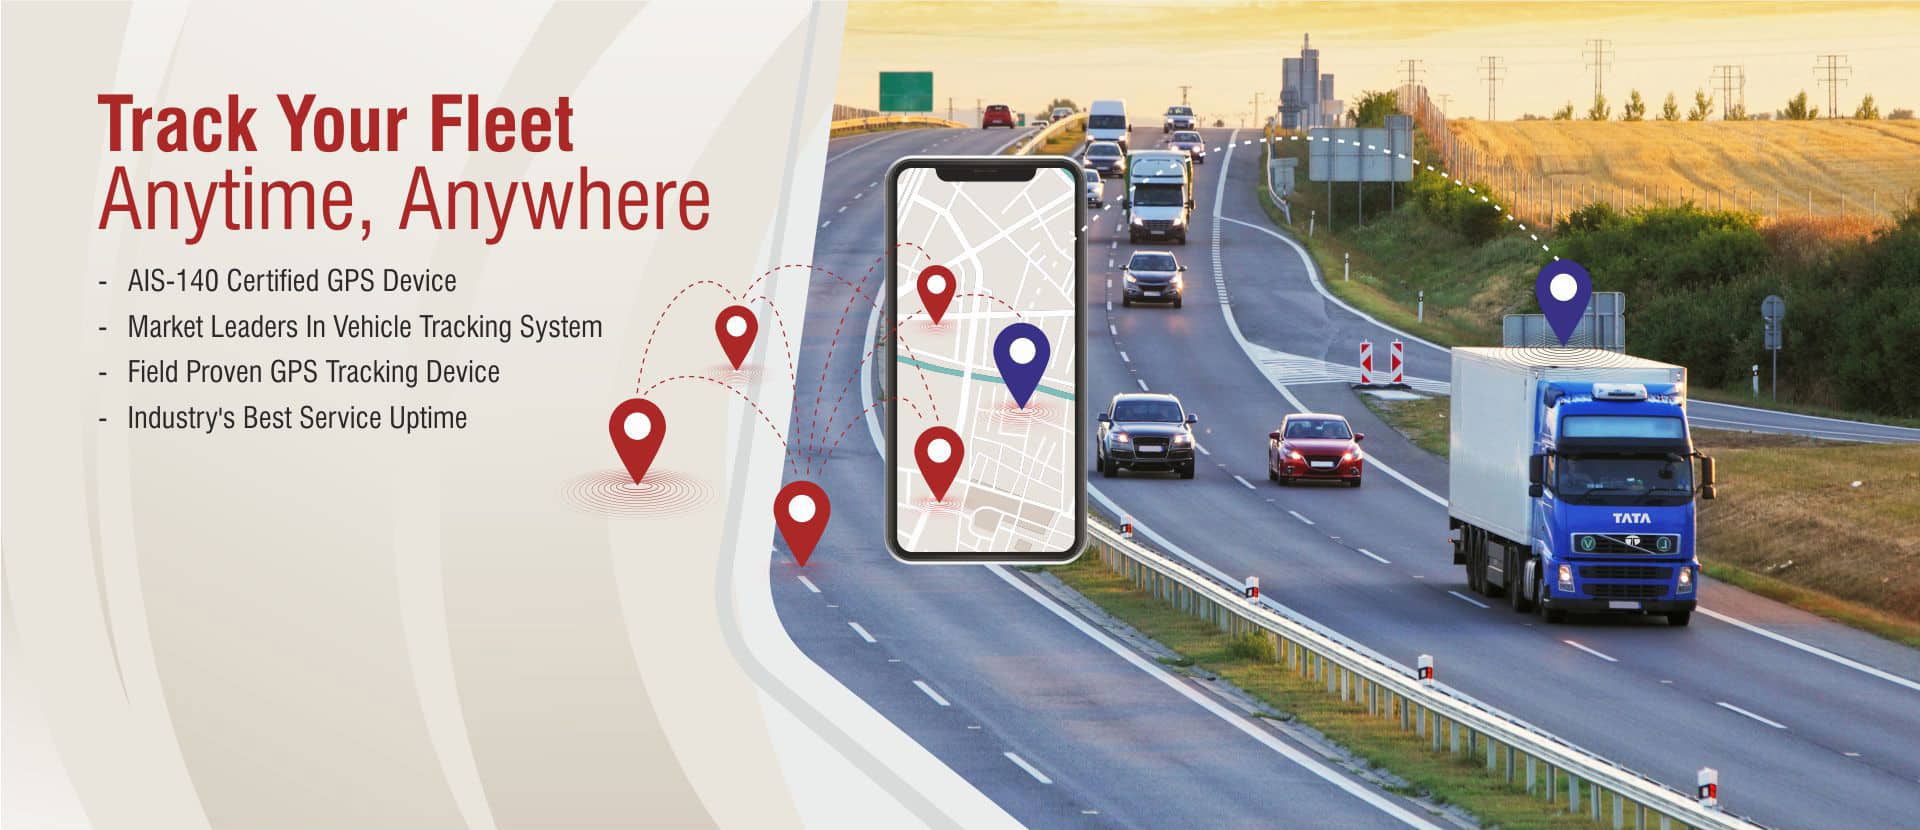 Track Your Fleet Anytime, Anywhere